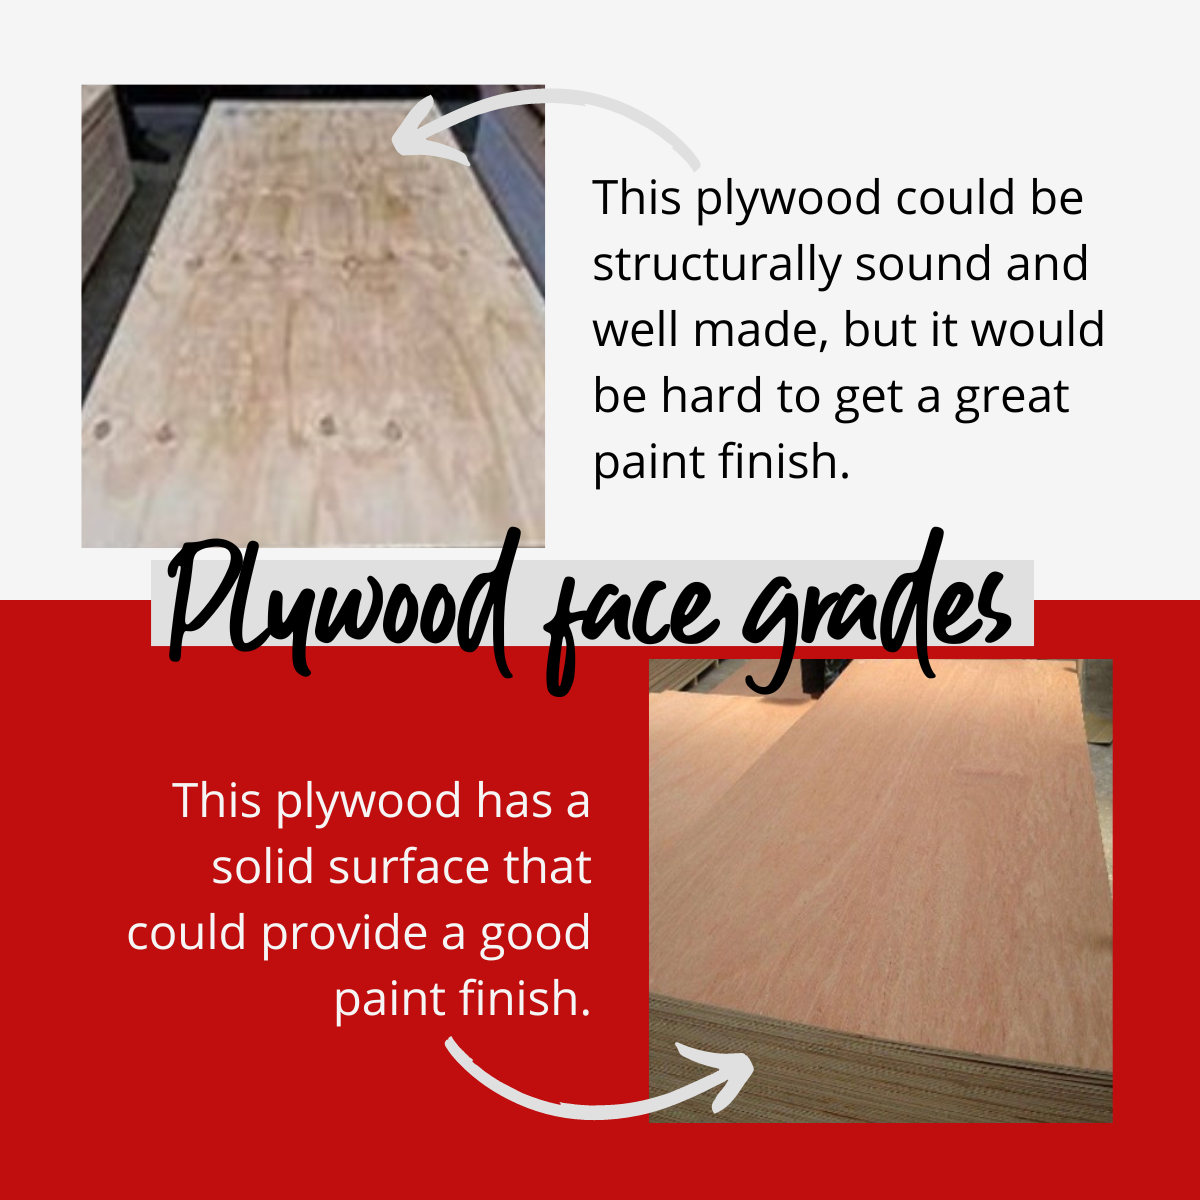 How plywood face grades affect plywood performance - Elliotts